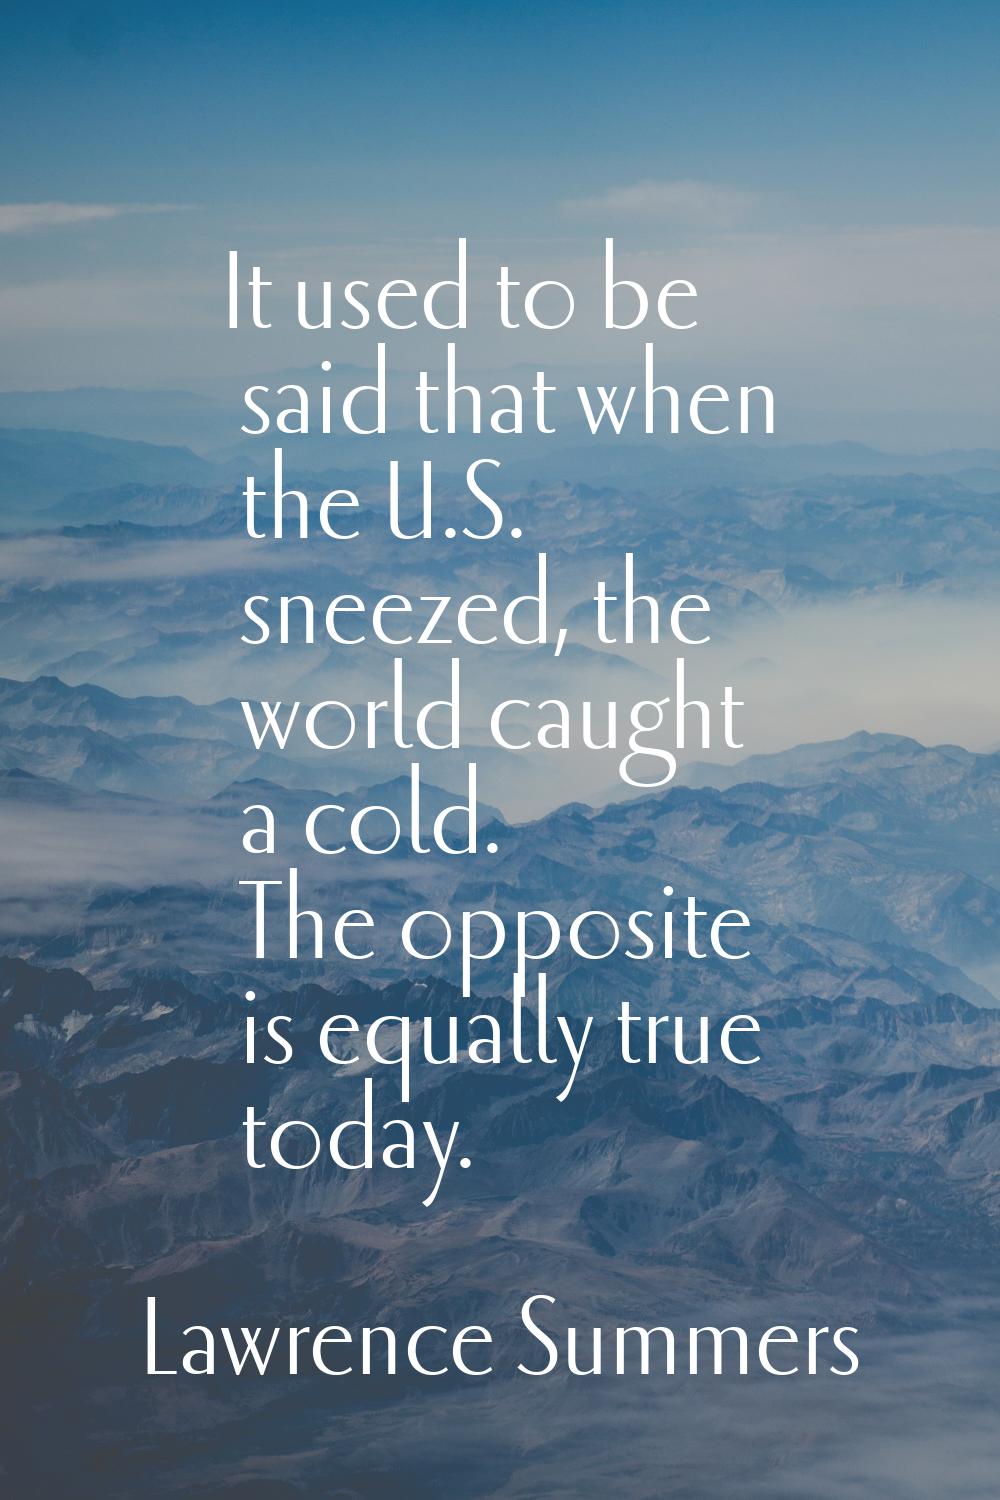 It used to be said that when the U.S. sneezed, the world caught a cold. The opposite is equally tru